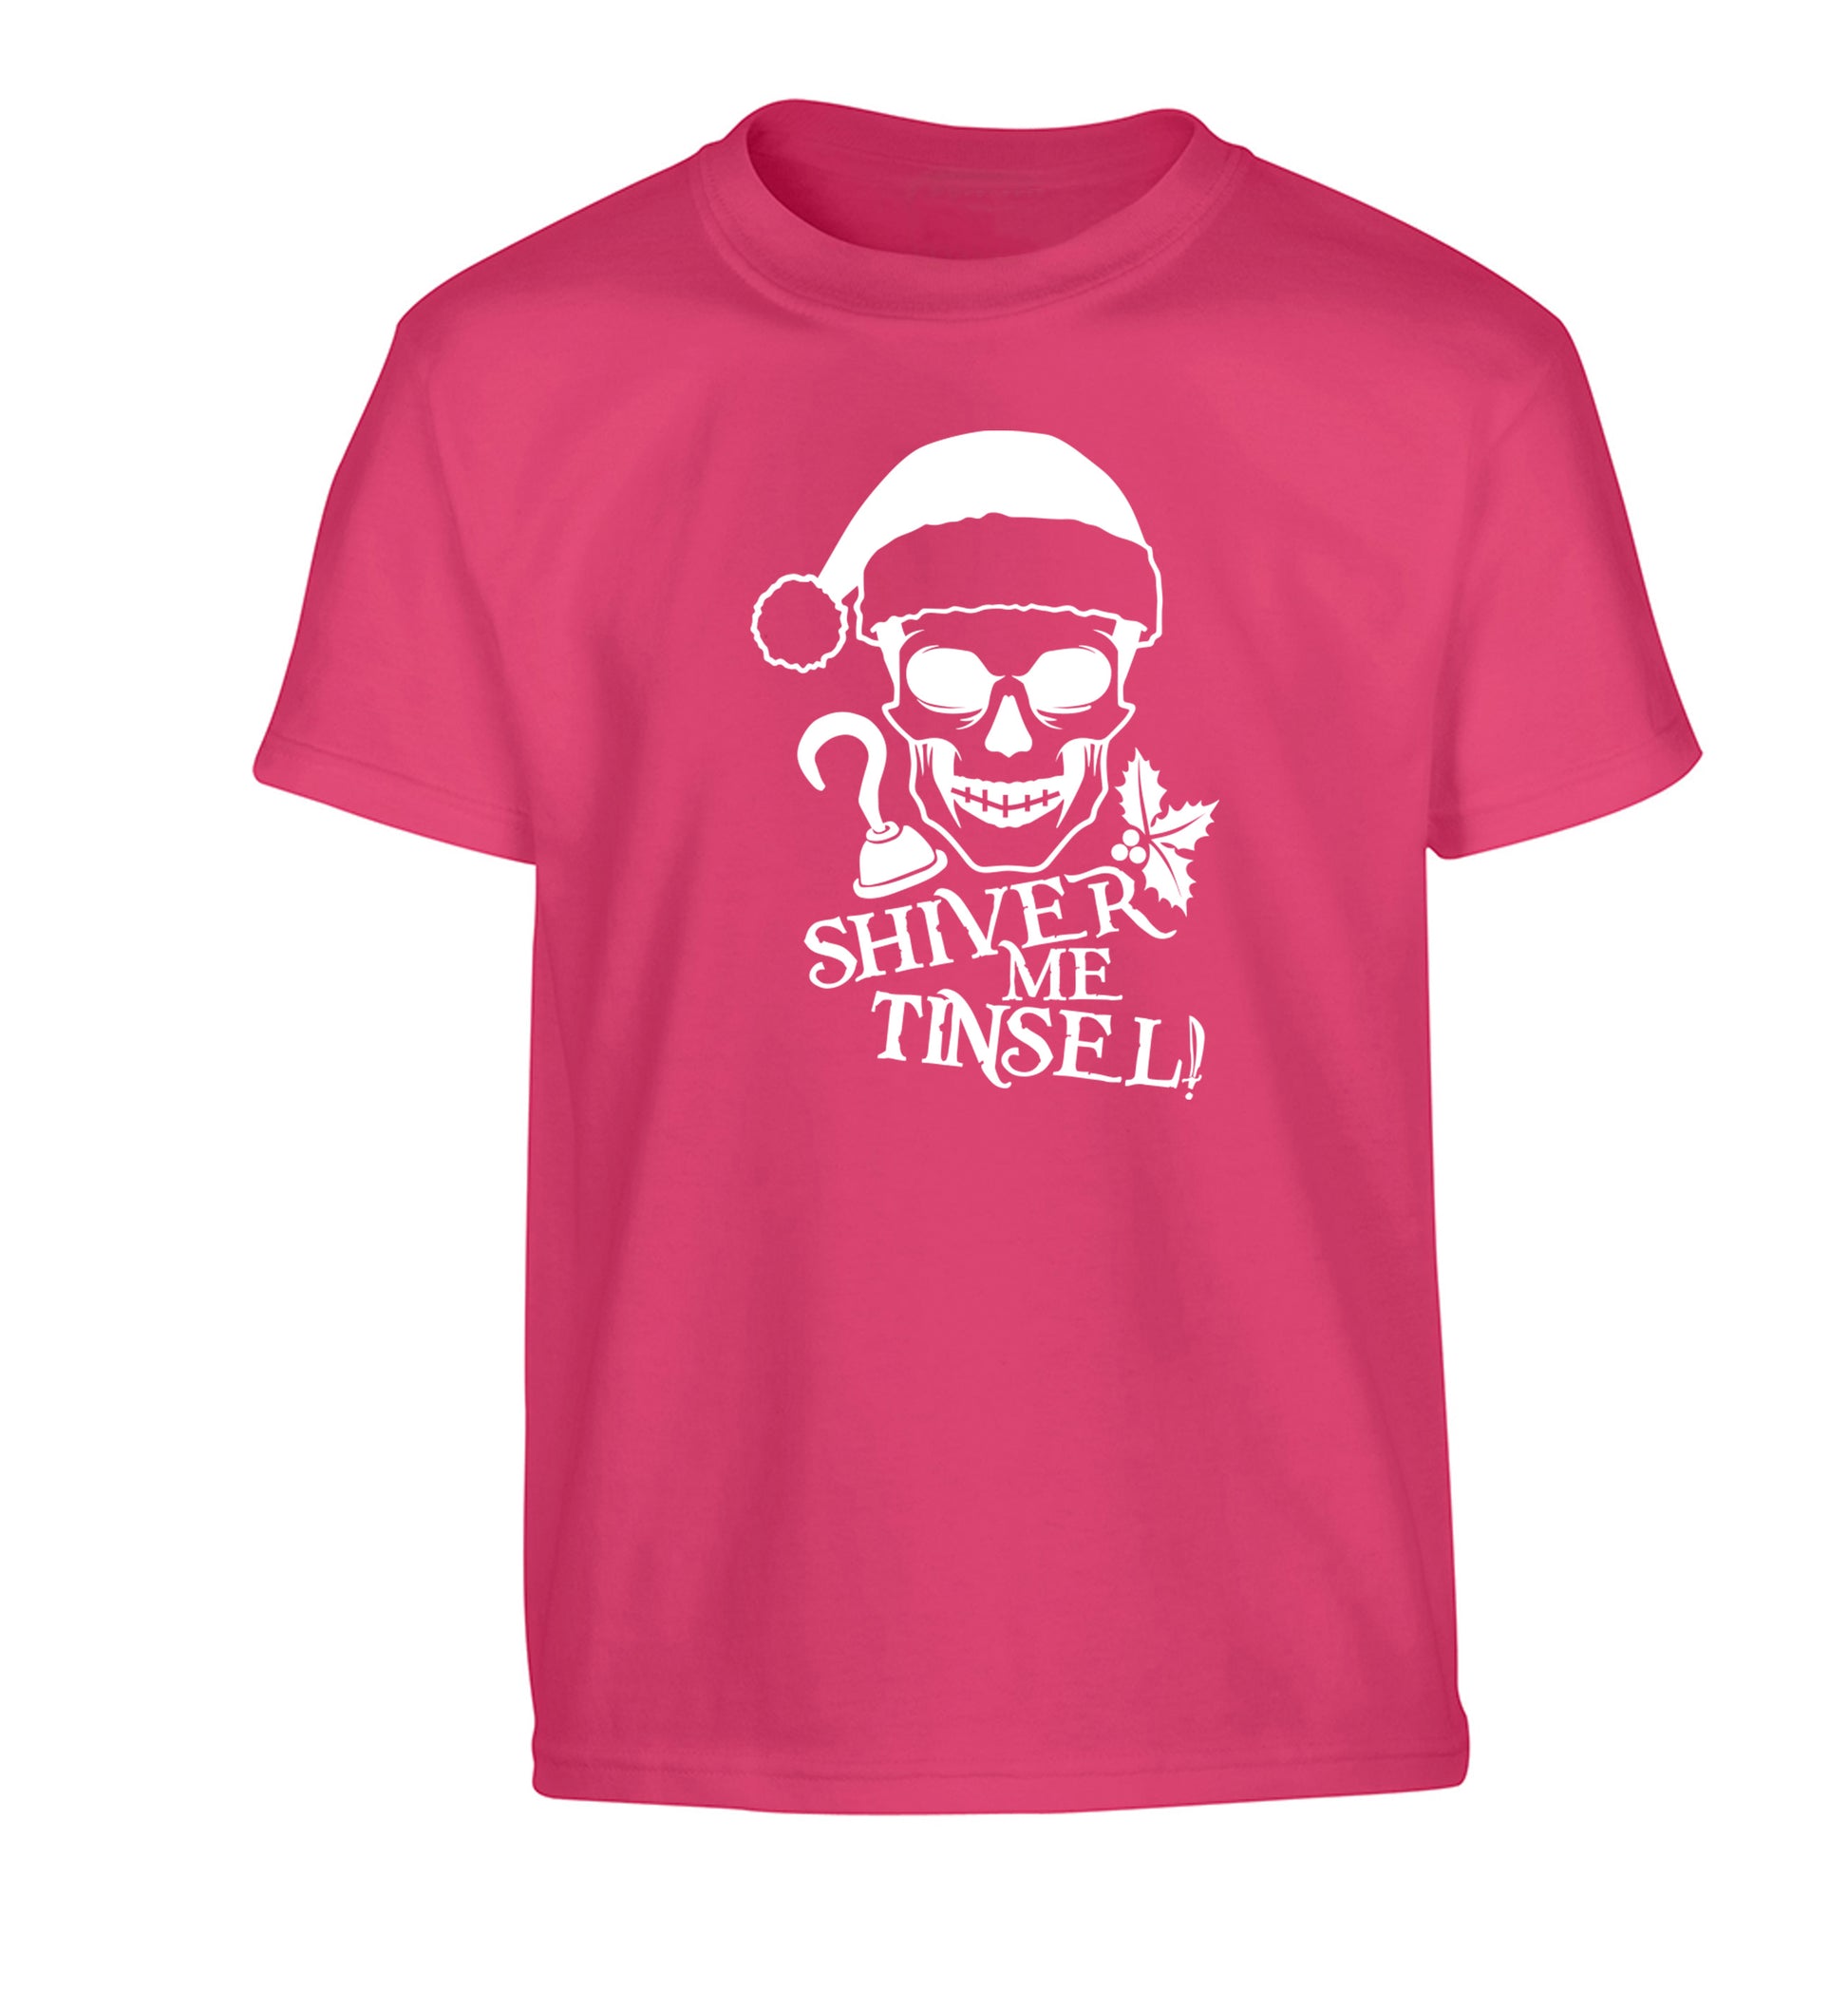 Shiver me tinsel Children's pink Tshirt 12-14 Years